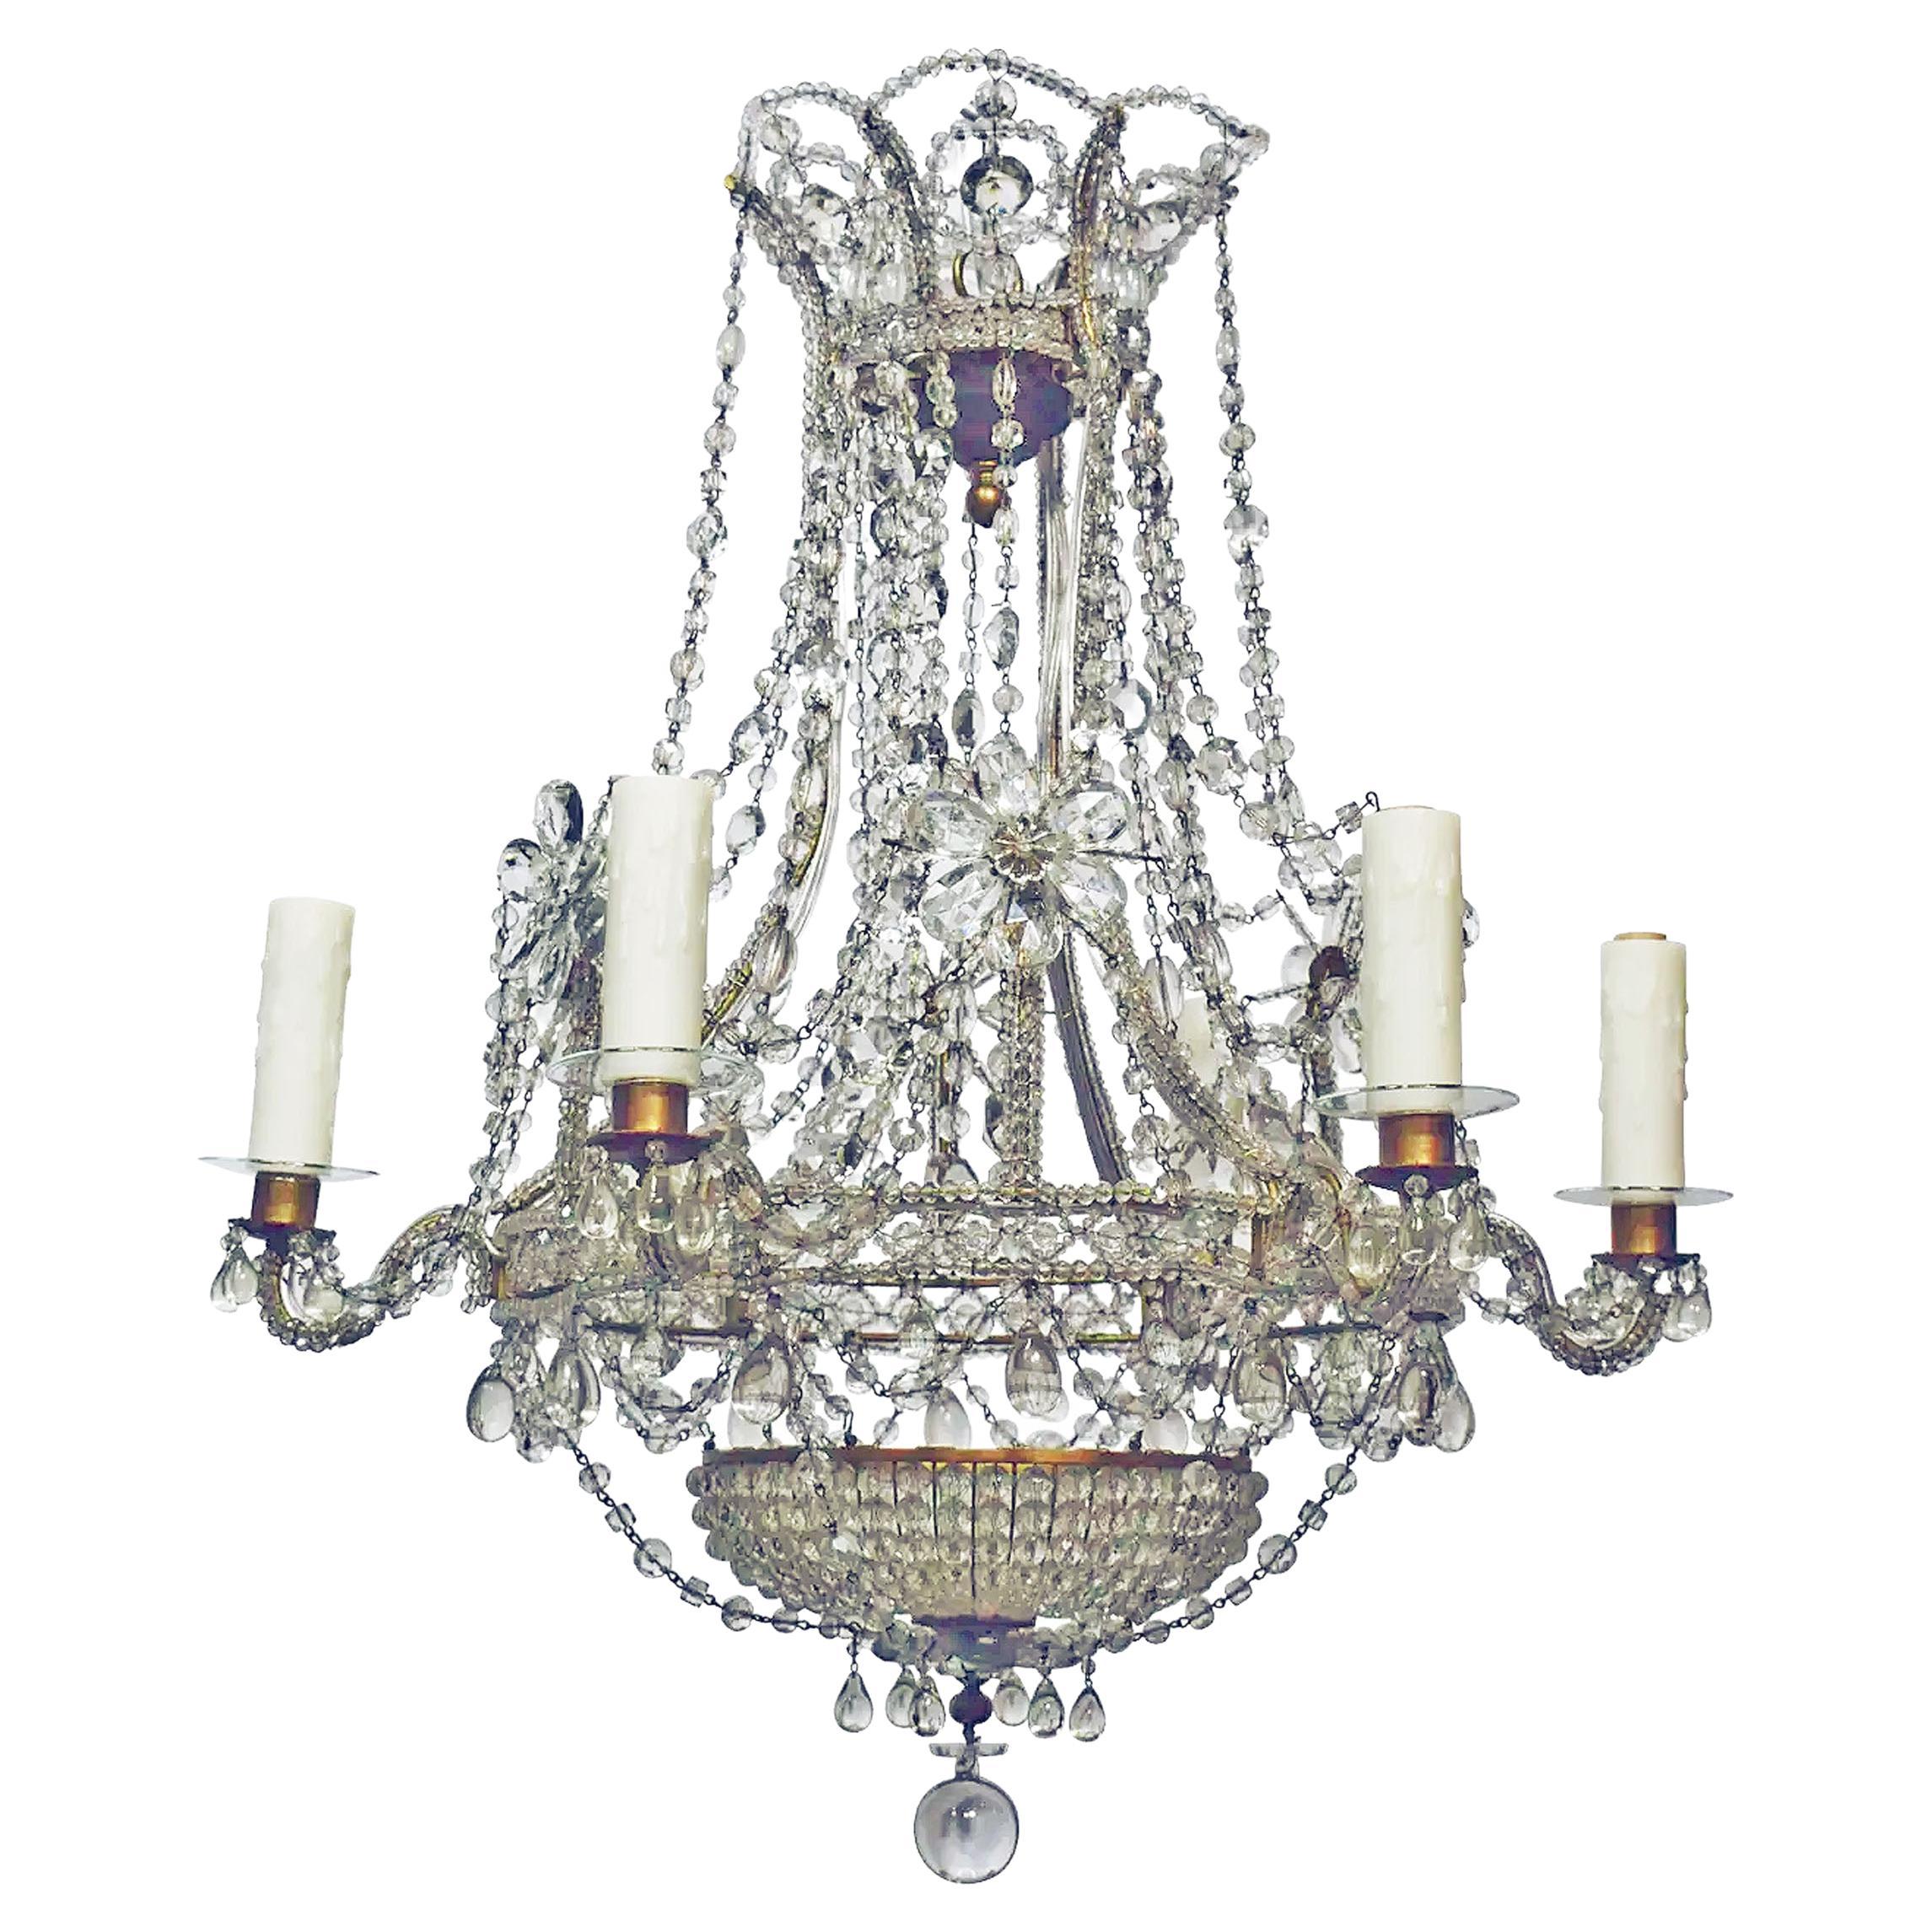 Very Fine & Decorative Baltic Chandelier For Sale